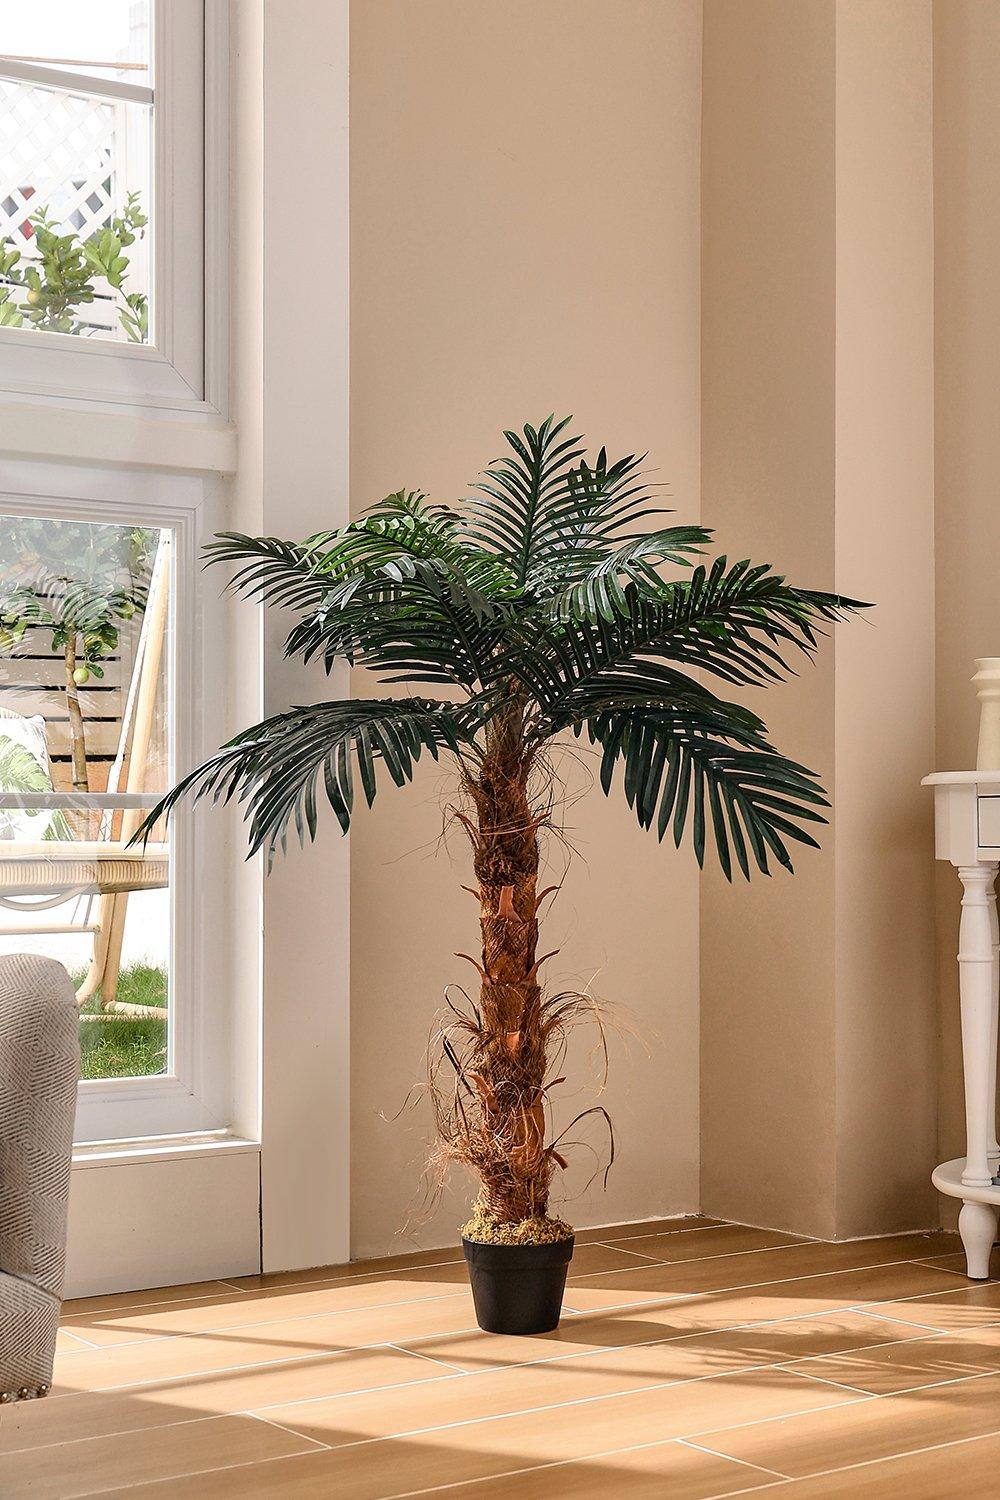 120cm Simulated Plant Indoor Outdoor Palm Tree Decor with Pot